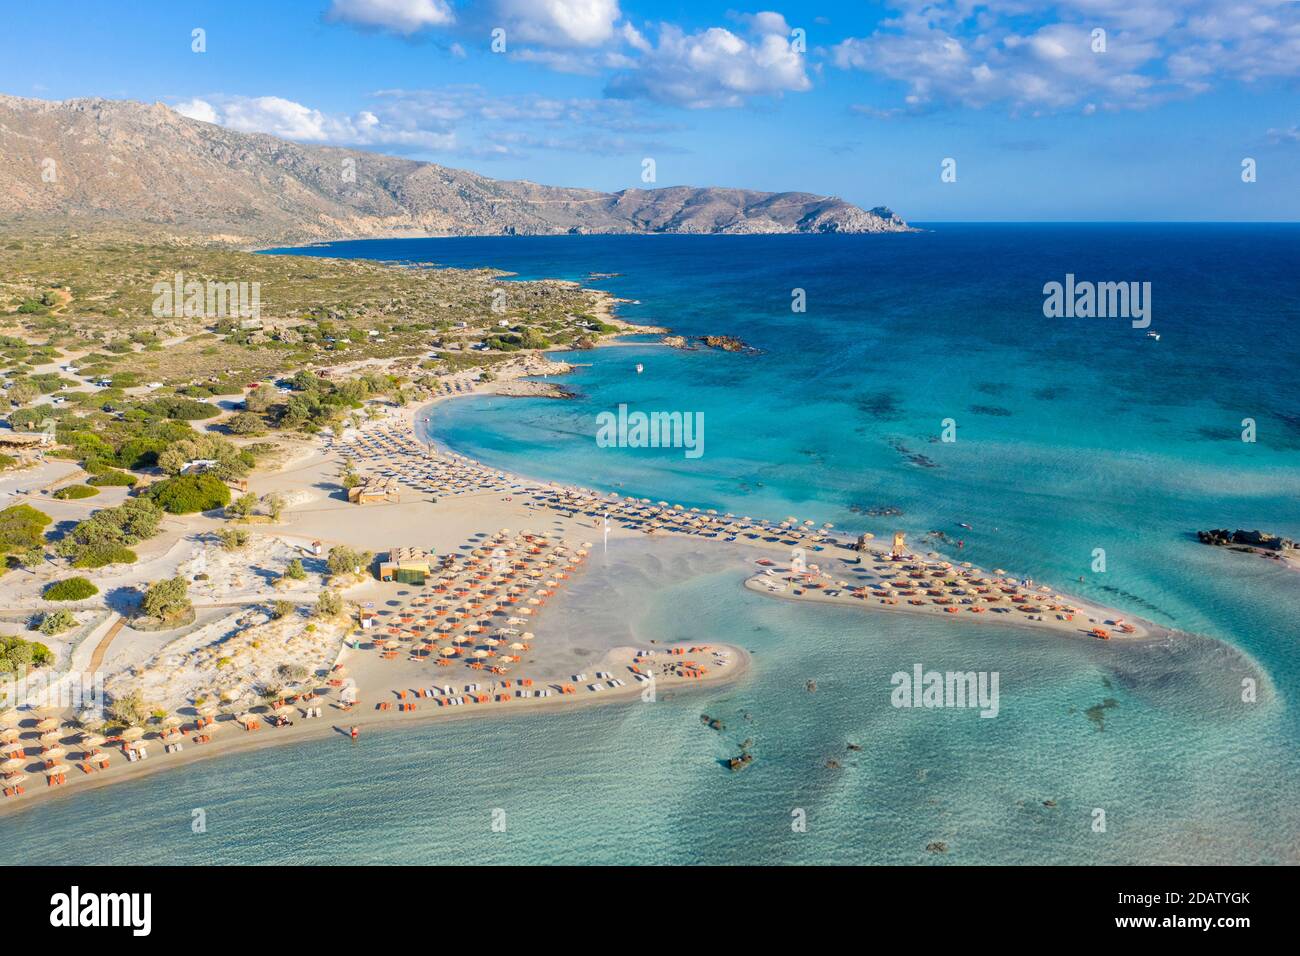 Aerial view of Elafonisi Beach, one of the most popular tourist destinations in the southwest of Crete, Greece Stock Photo